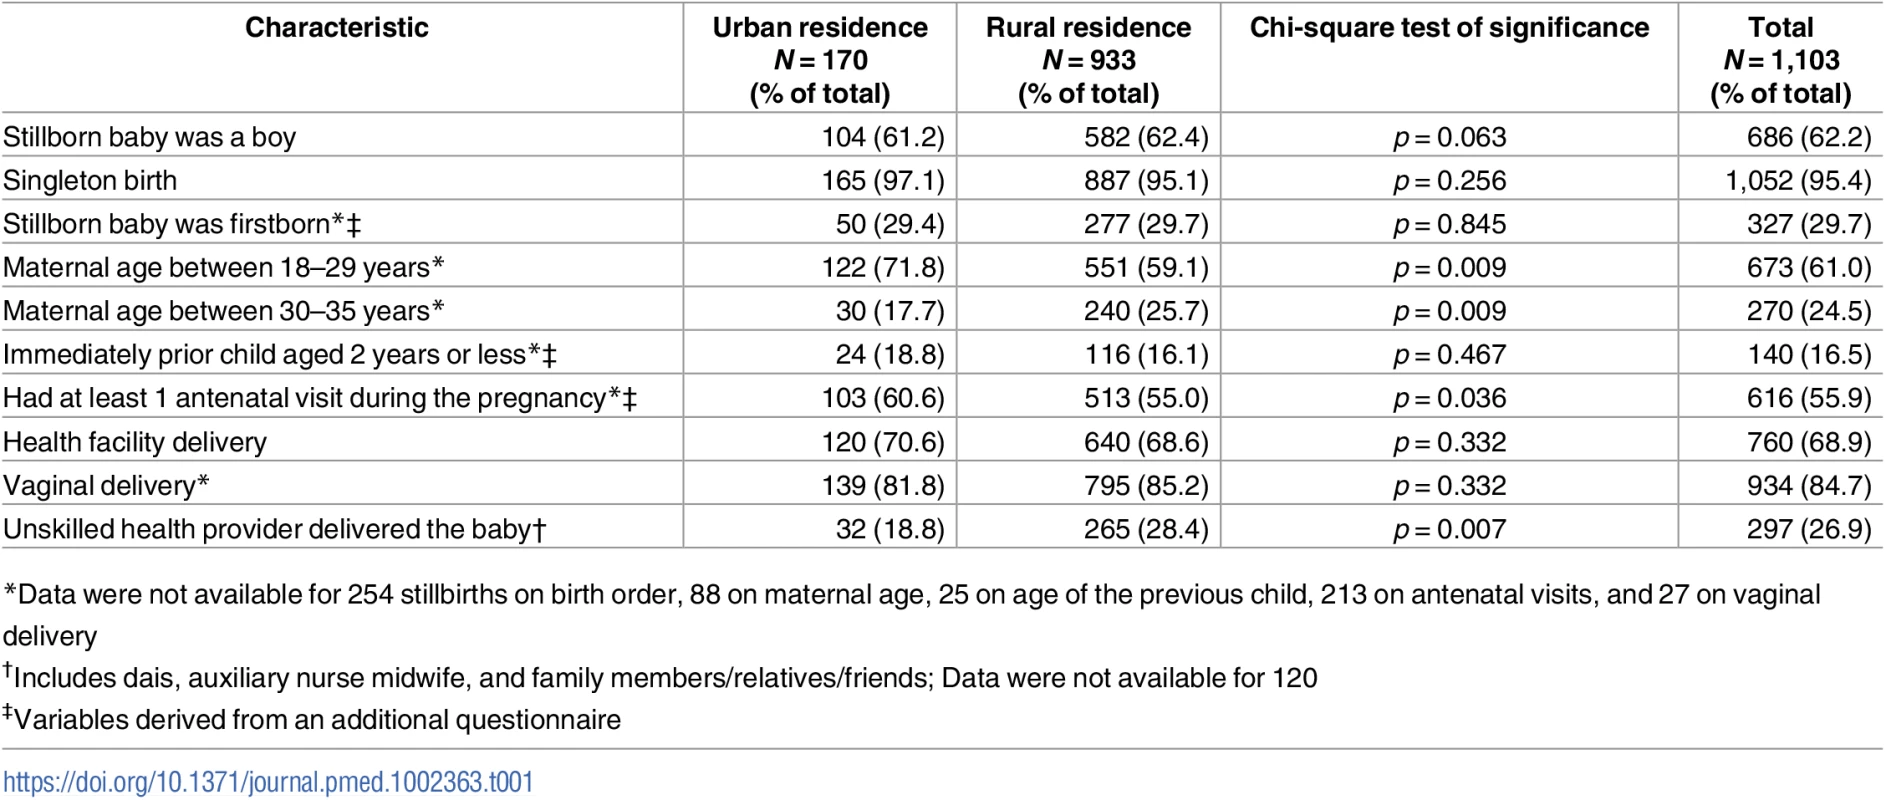 Basic descriptive data for births that resulted in a stillbirth between January 2011 and March 2014 in the Indian state of Bihar.